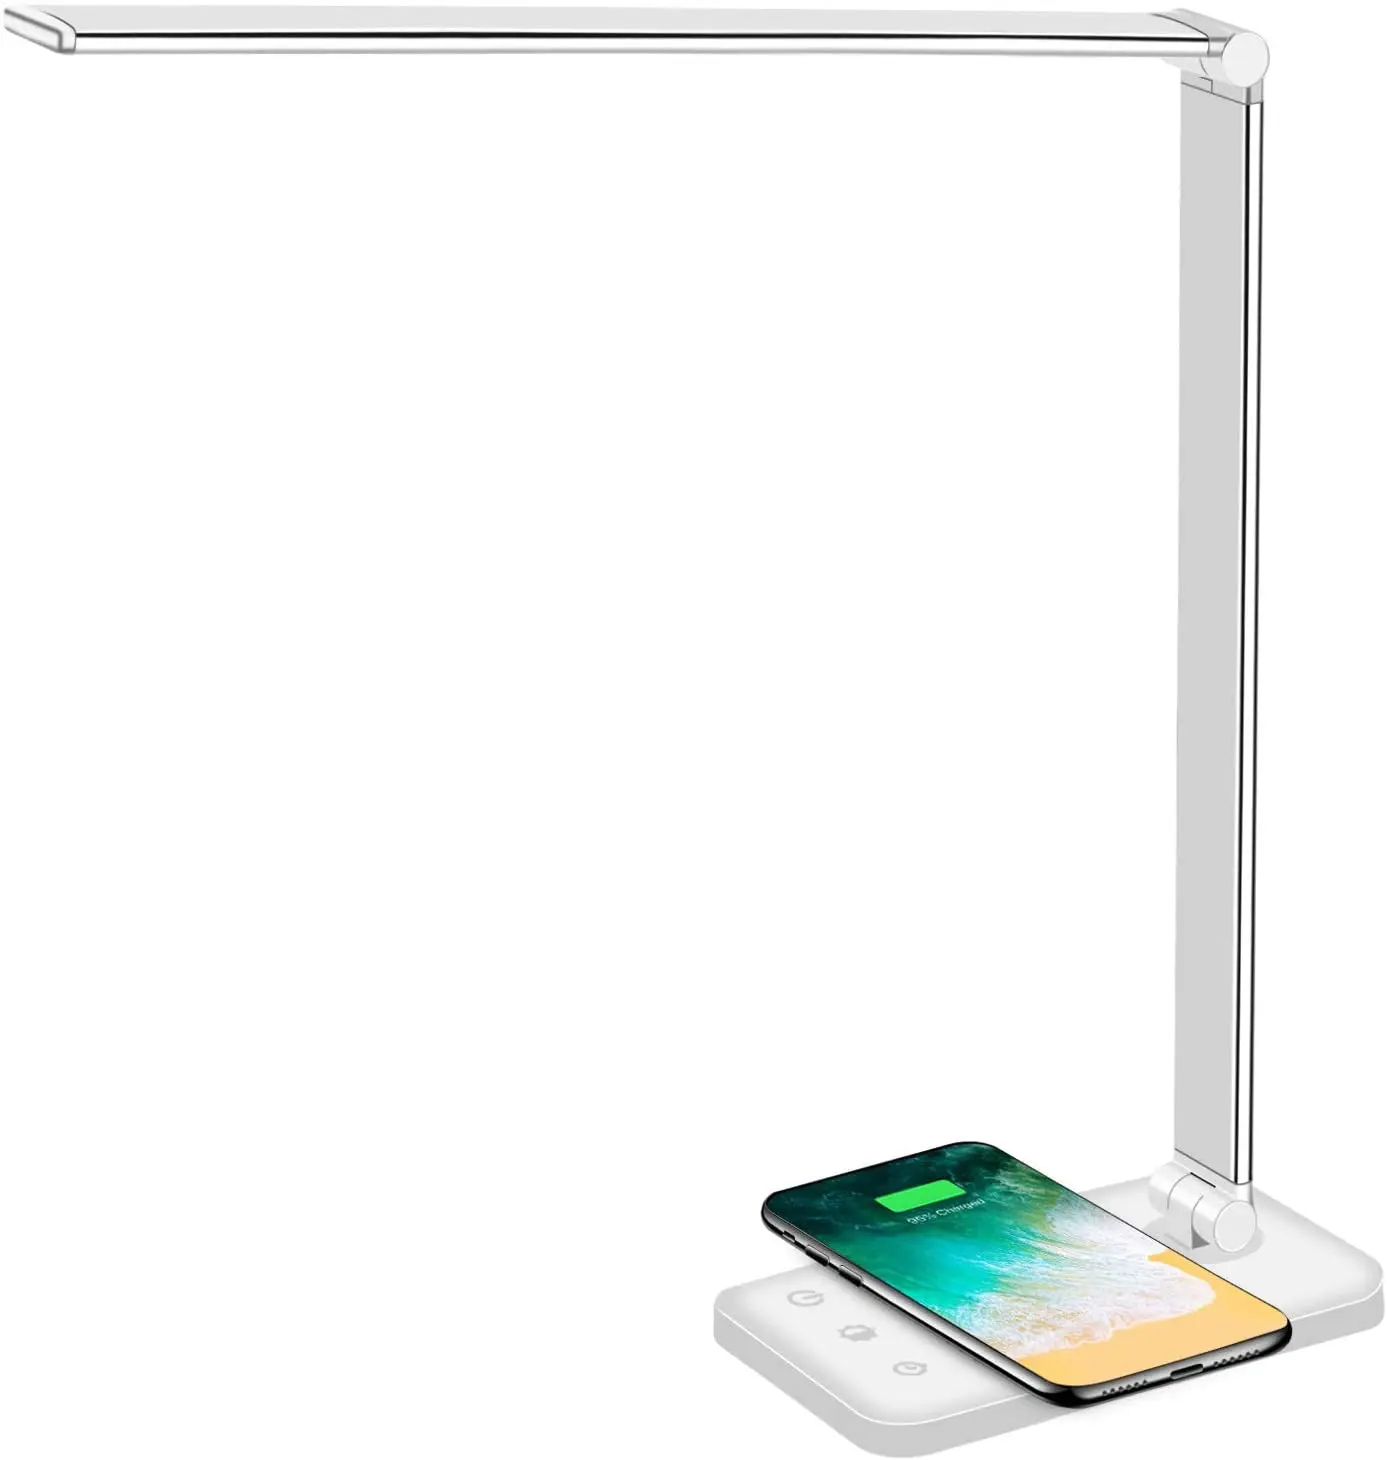 LED Desk Lamp with Wireless Charging 5W Fast Wireless Charging Desk Lamp LED Dimmable Eye Caring Natural Light Task Lamp